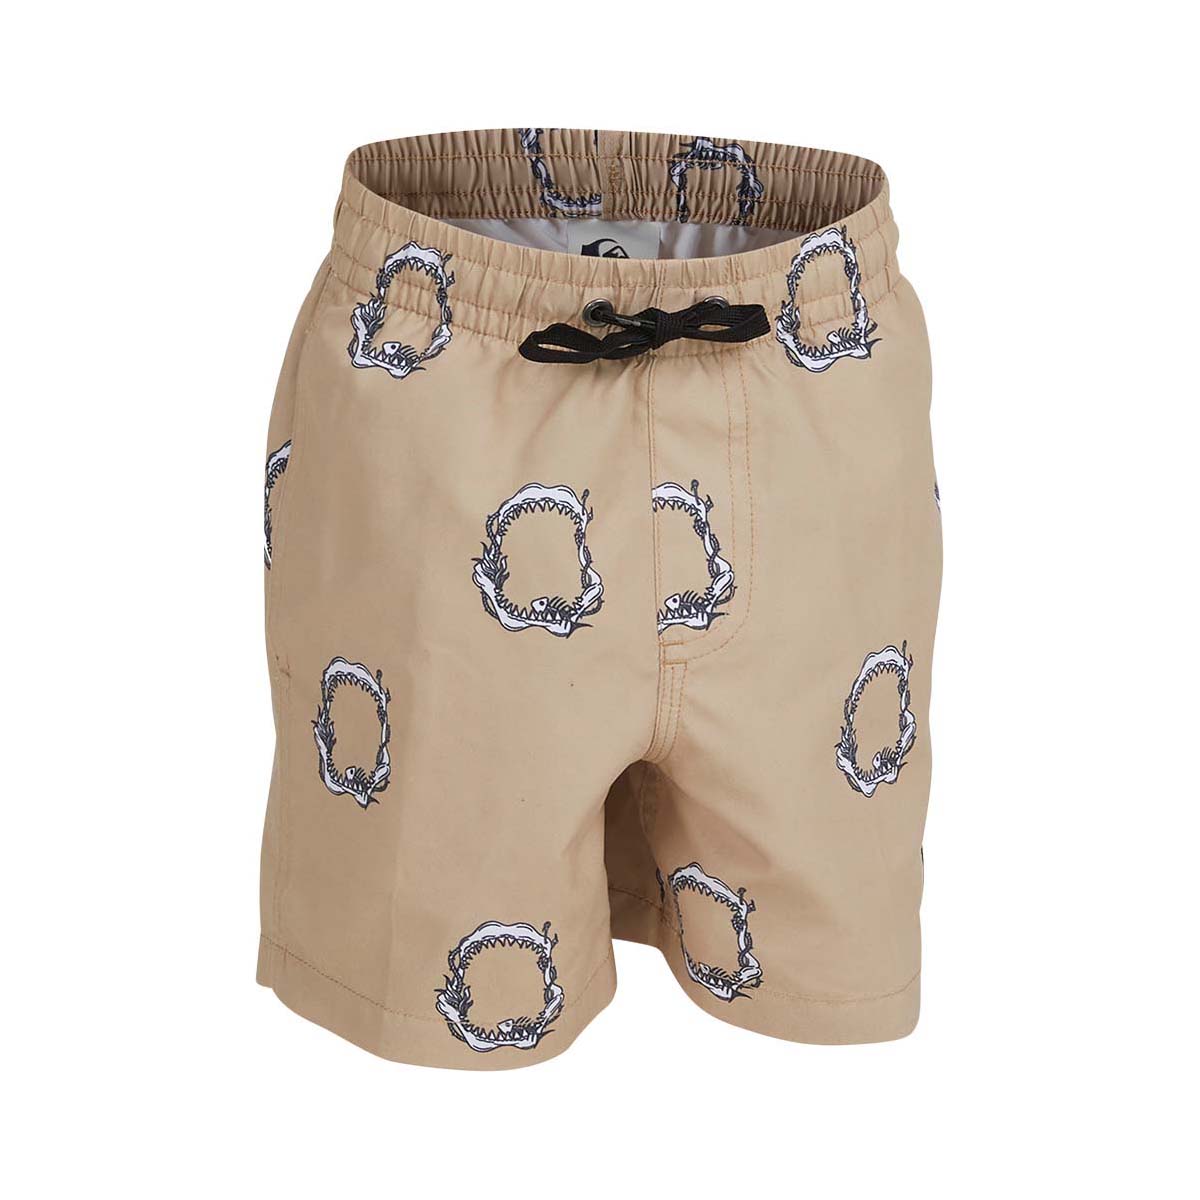 Quiksilver Kids' Tooth Pick Boardshorts Incense 5